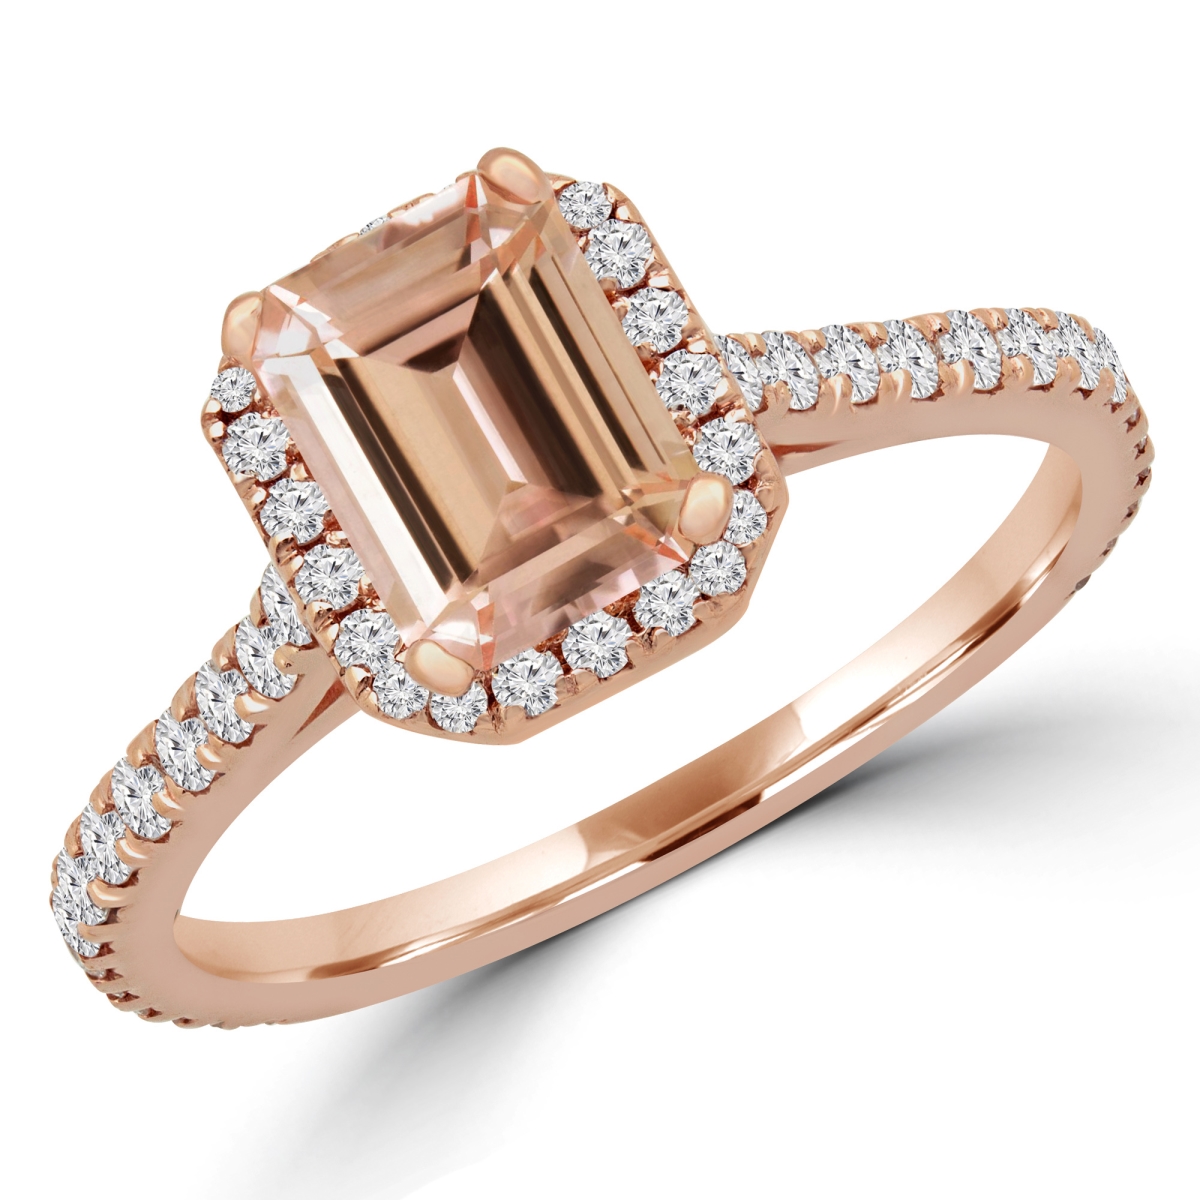 Picture of Majesty Diamonds MD180580-5.75 1.25 CTW Emerald Pink Morganite Halo Engagement Ring in 14K Rose Gold - Size 5.75